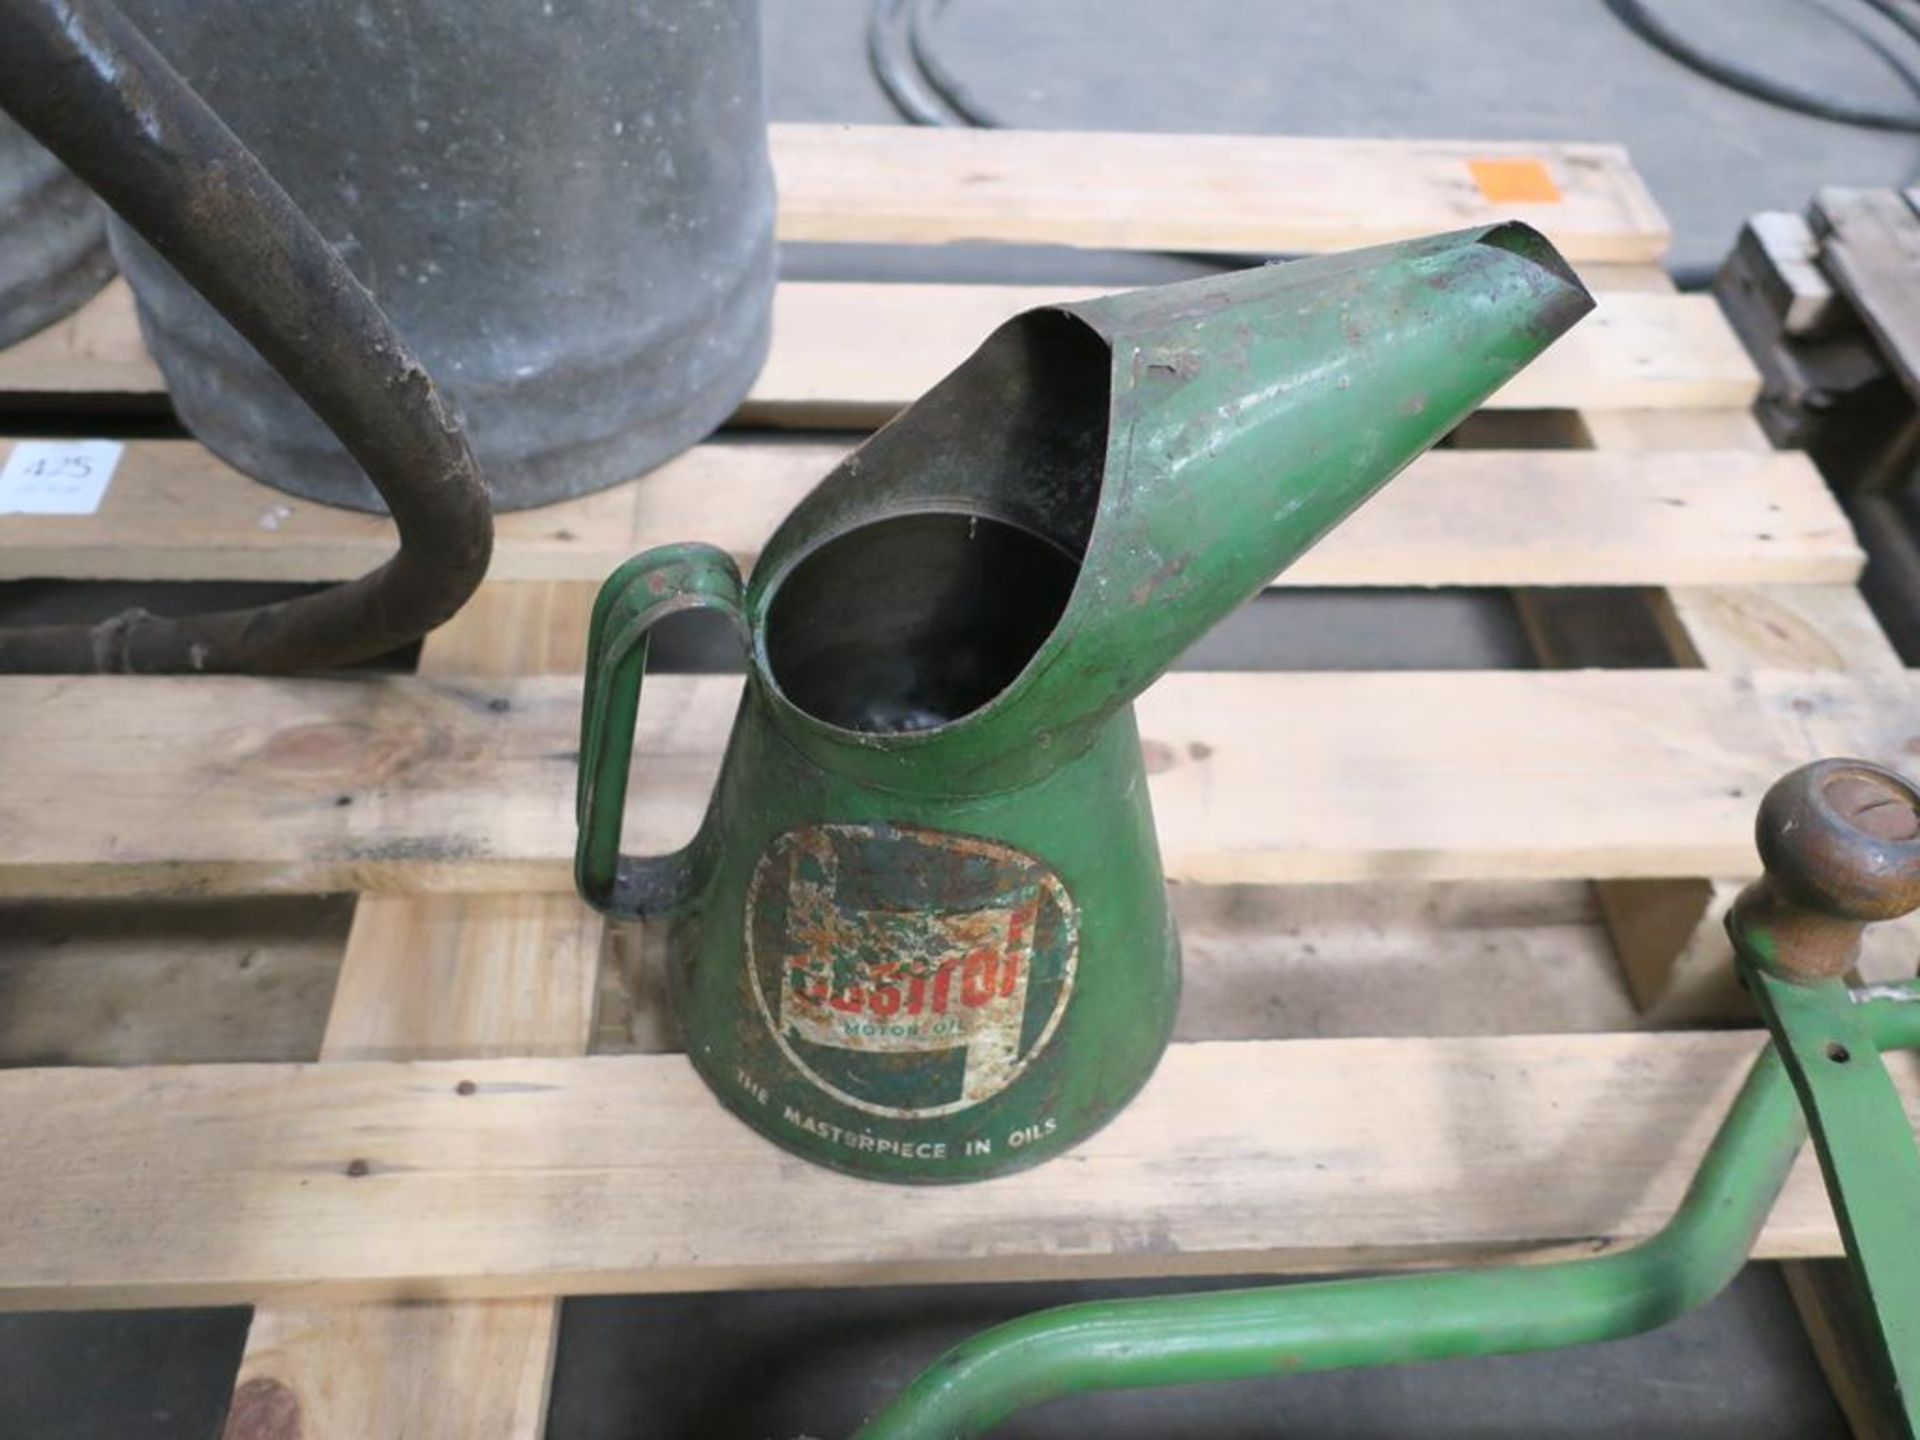 A Set of 3 Vintage Castrol items to include Gear Oil Pump, Oil Tin/Pourer and a Barrel Pump and Tank - Bild 3 aus 4